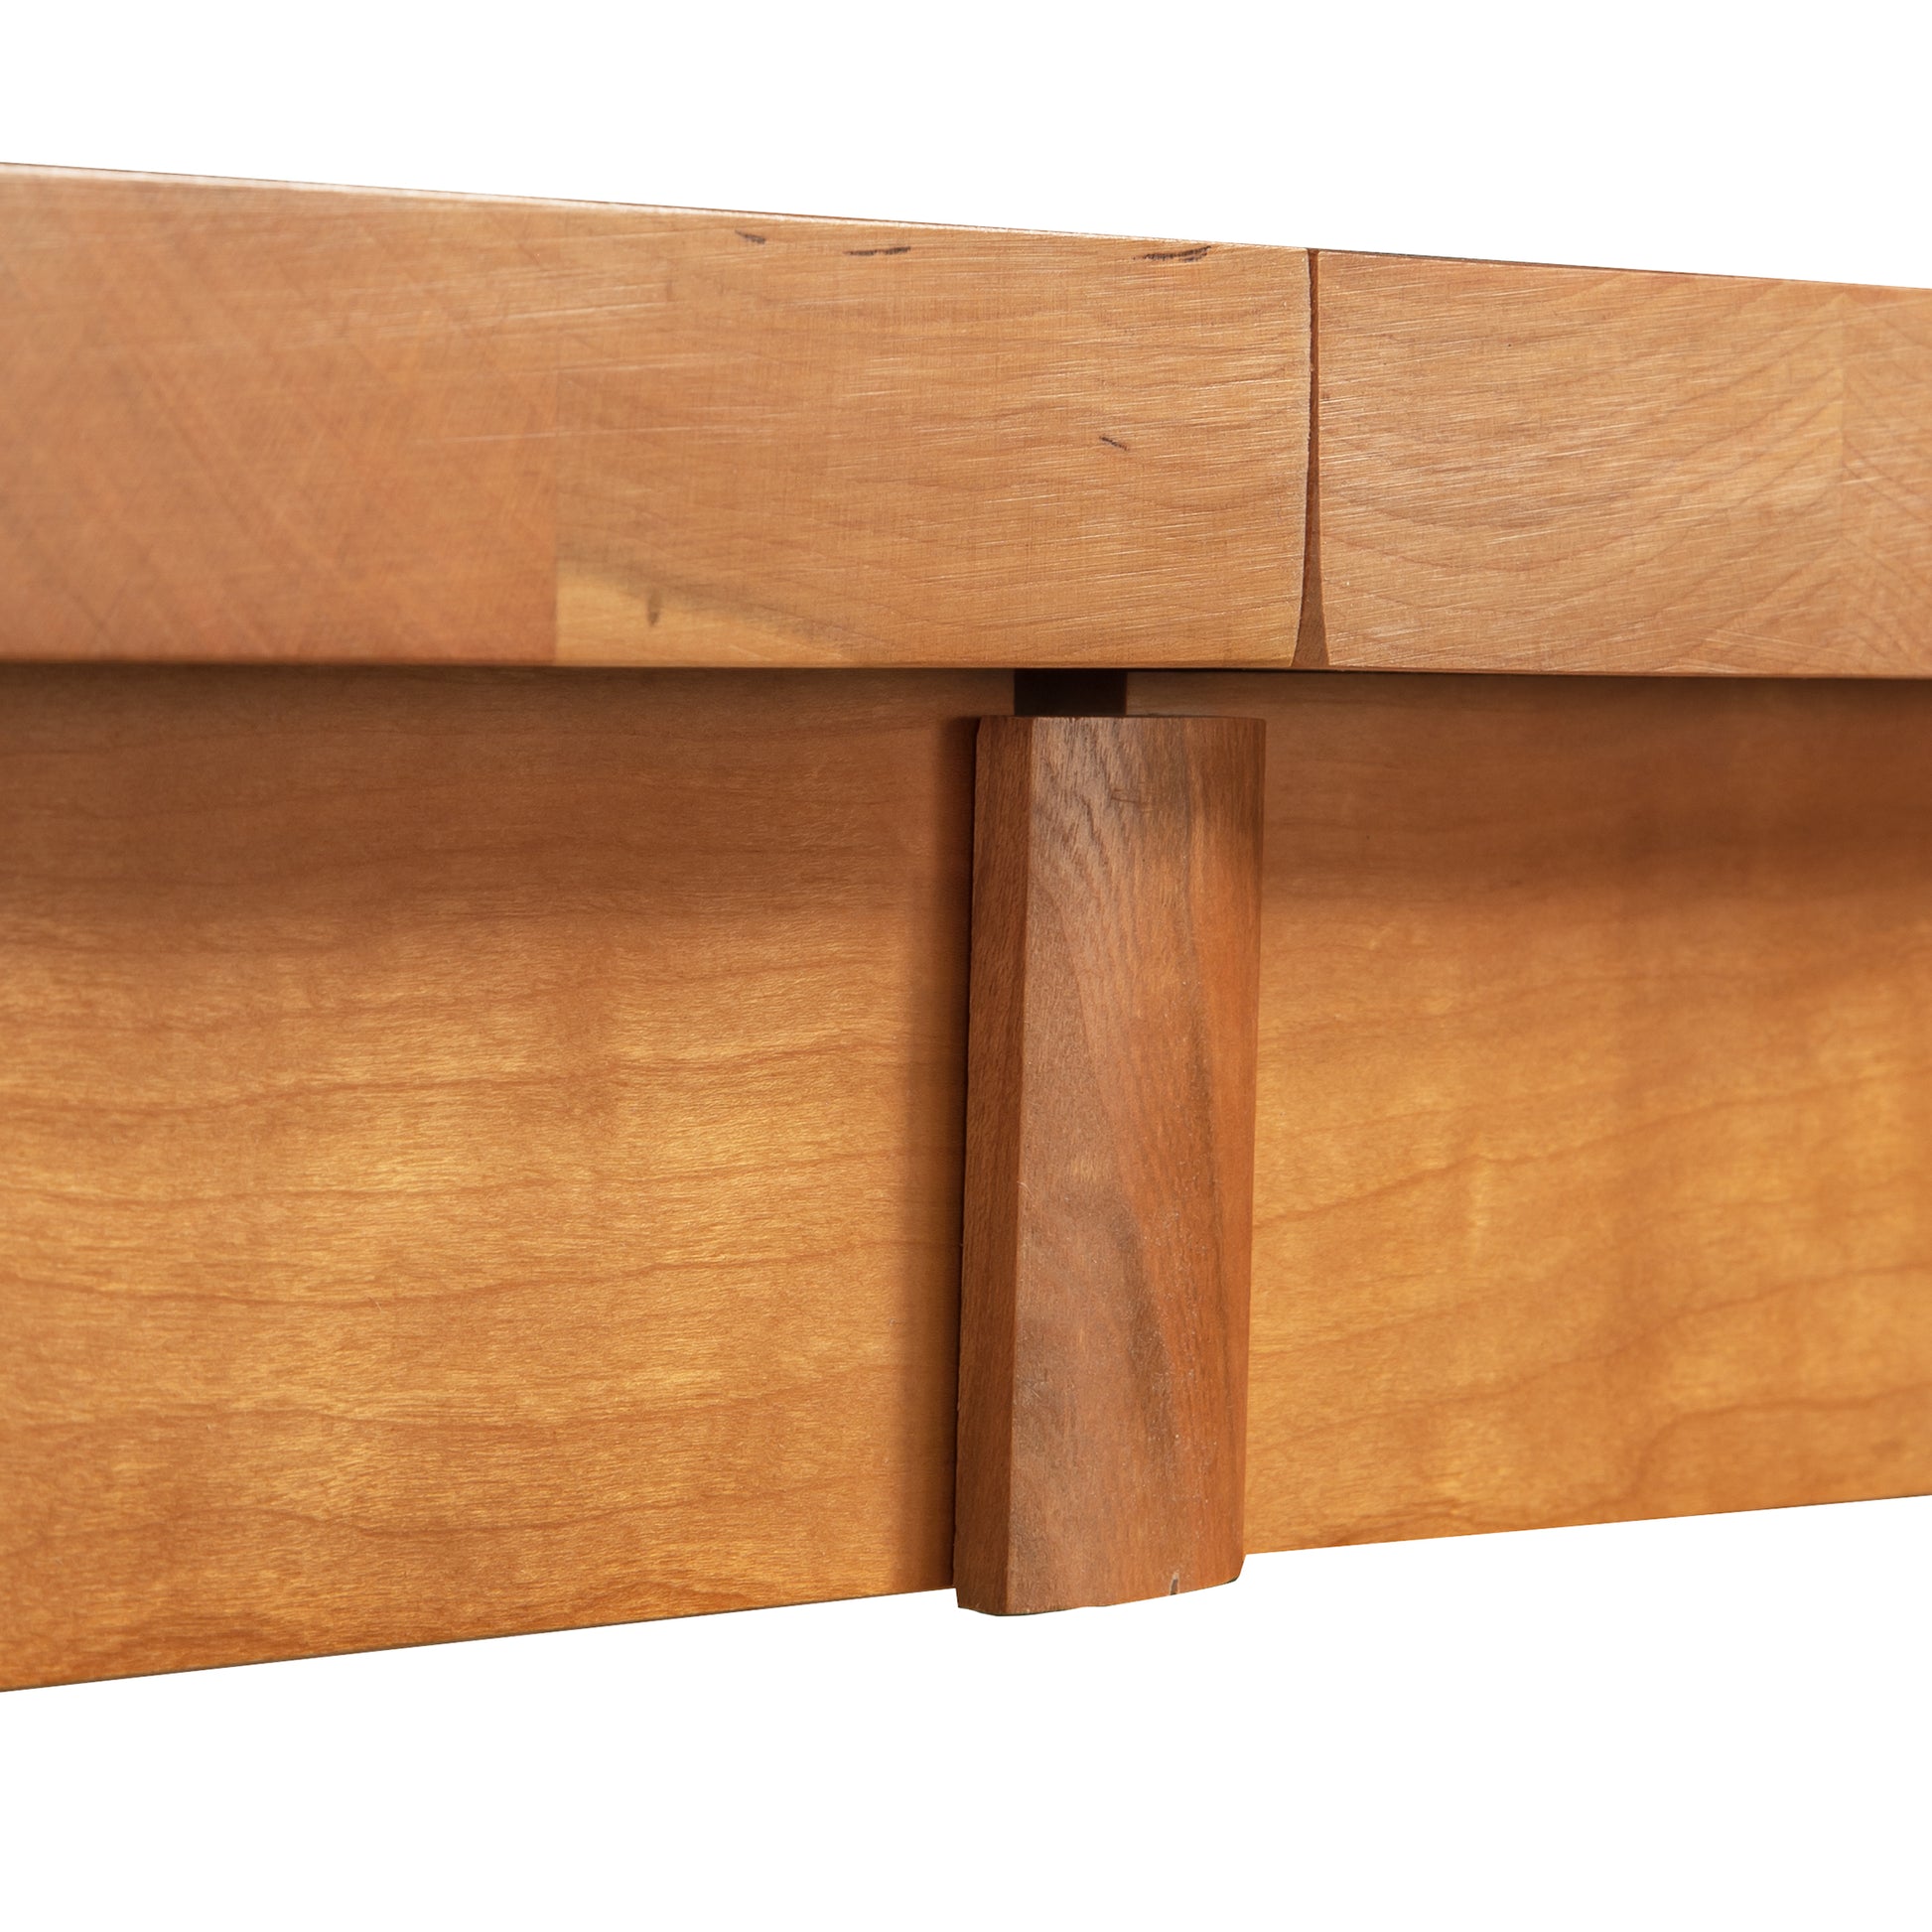 A Modern Mission Parsons Extension Table desk with two drawers, made from sustainably harvested woods.